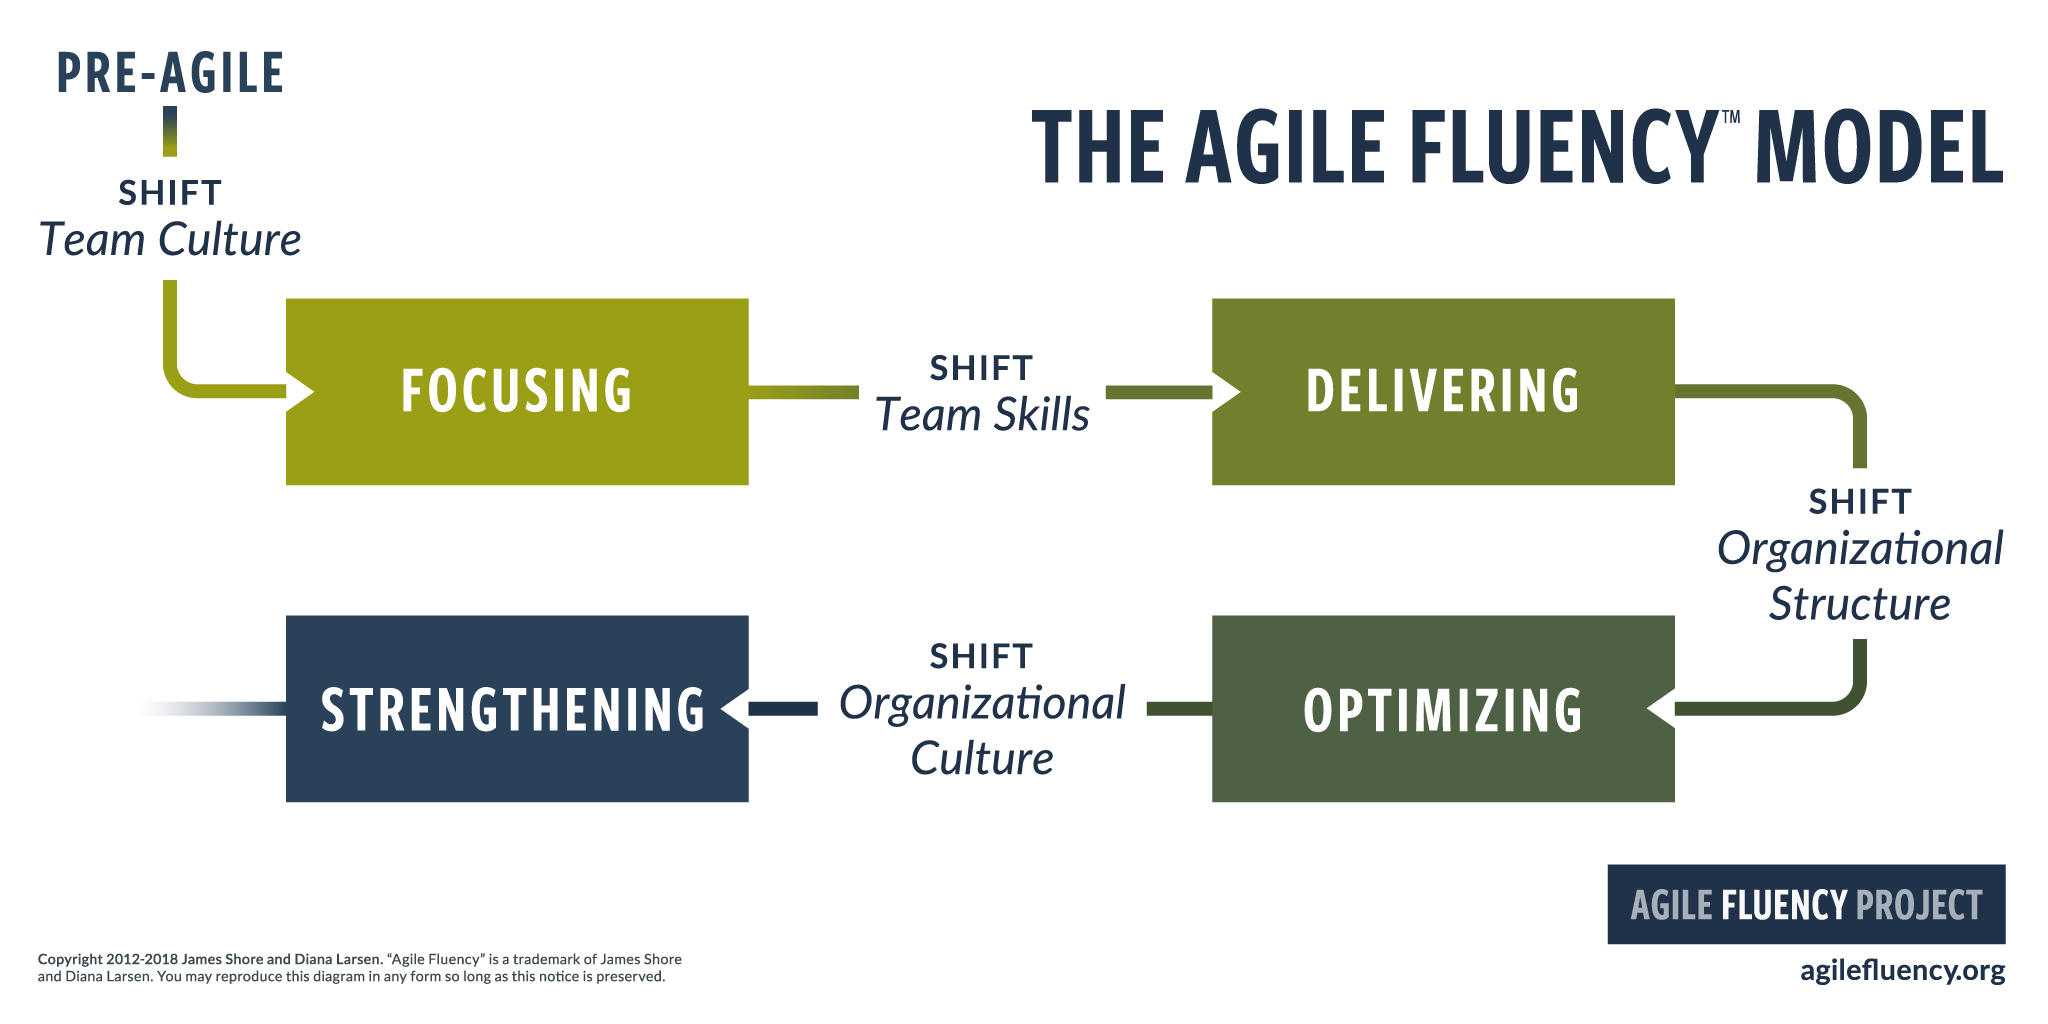 Getting in the agile zone with the fluency model